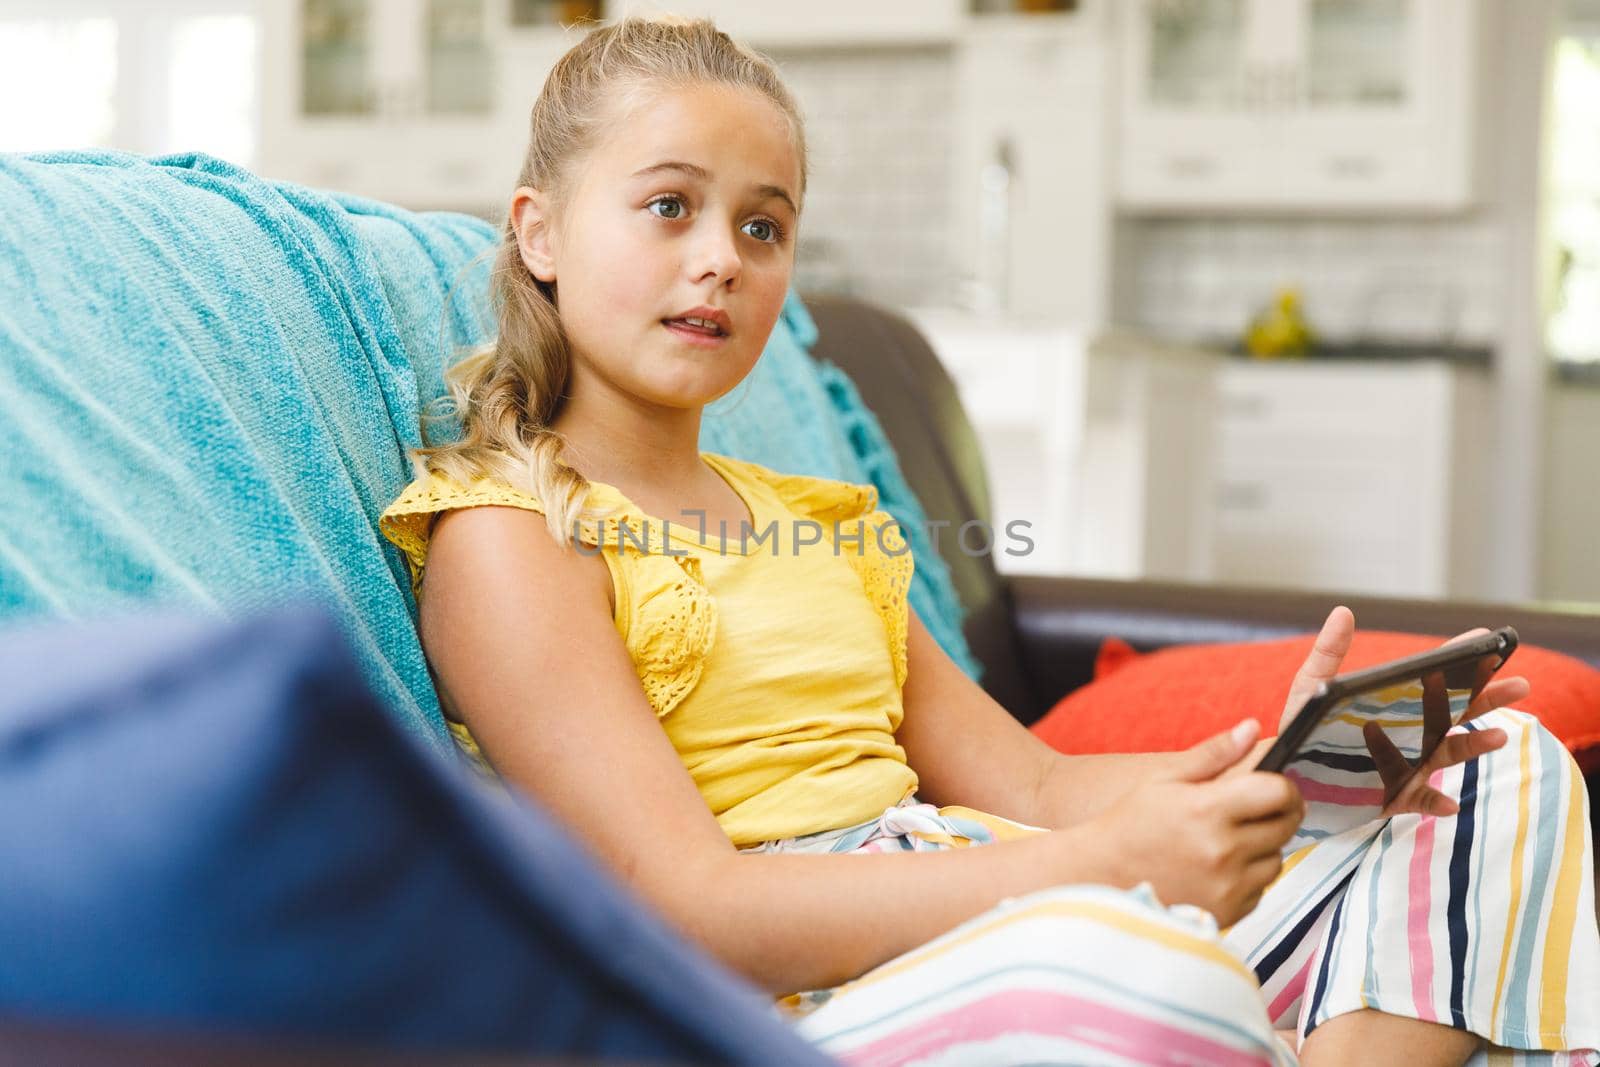 Caucasian girl sitting on couch and using tablet in living room. childhood leisure time, fun and discovery at at home using technology.